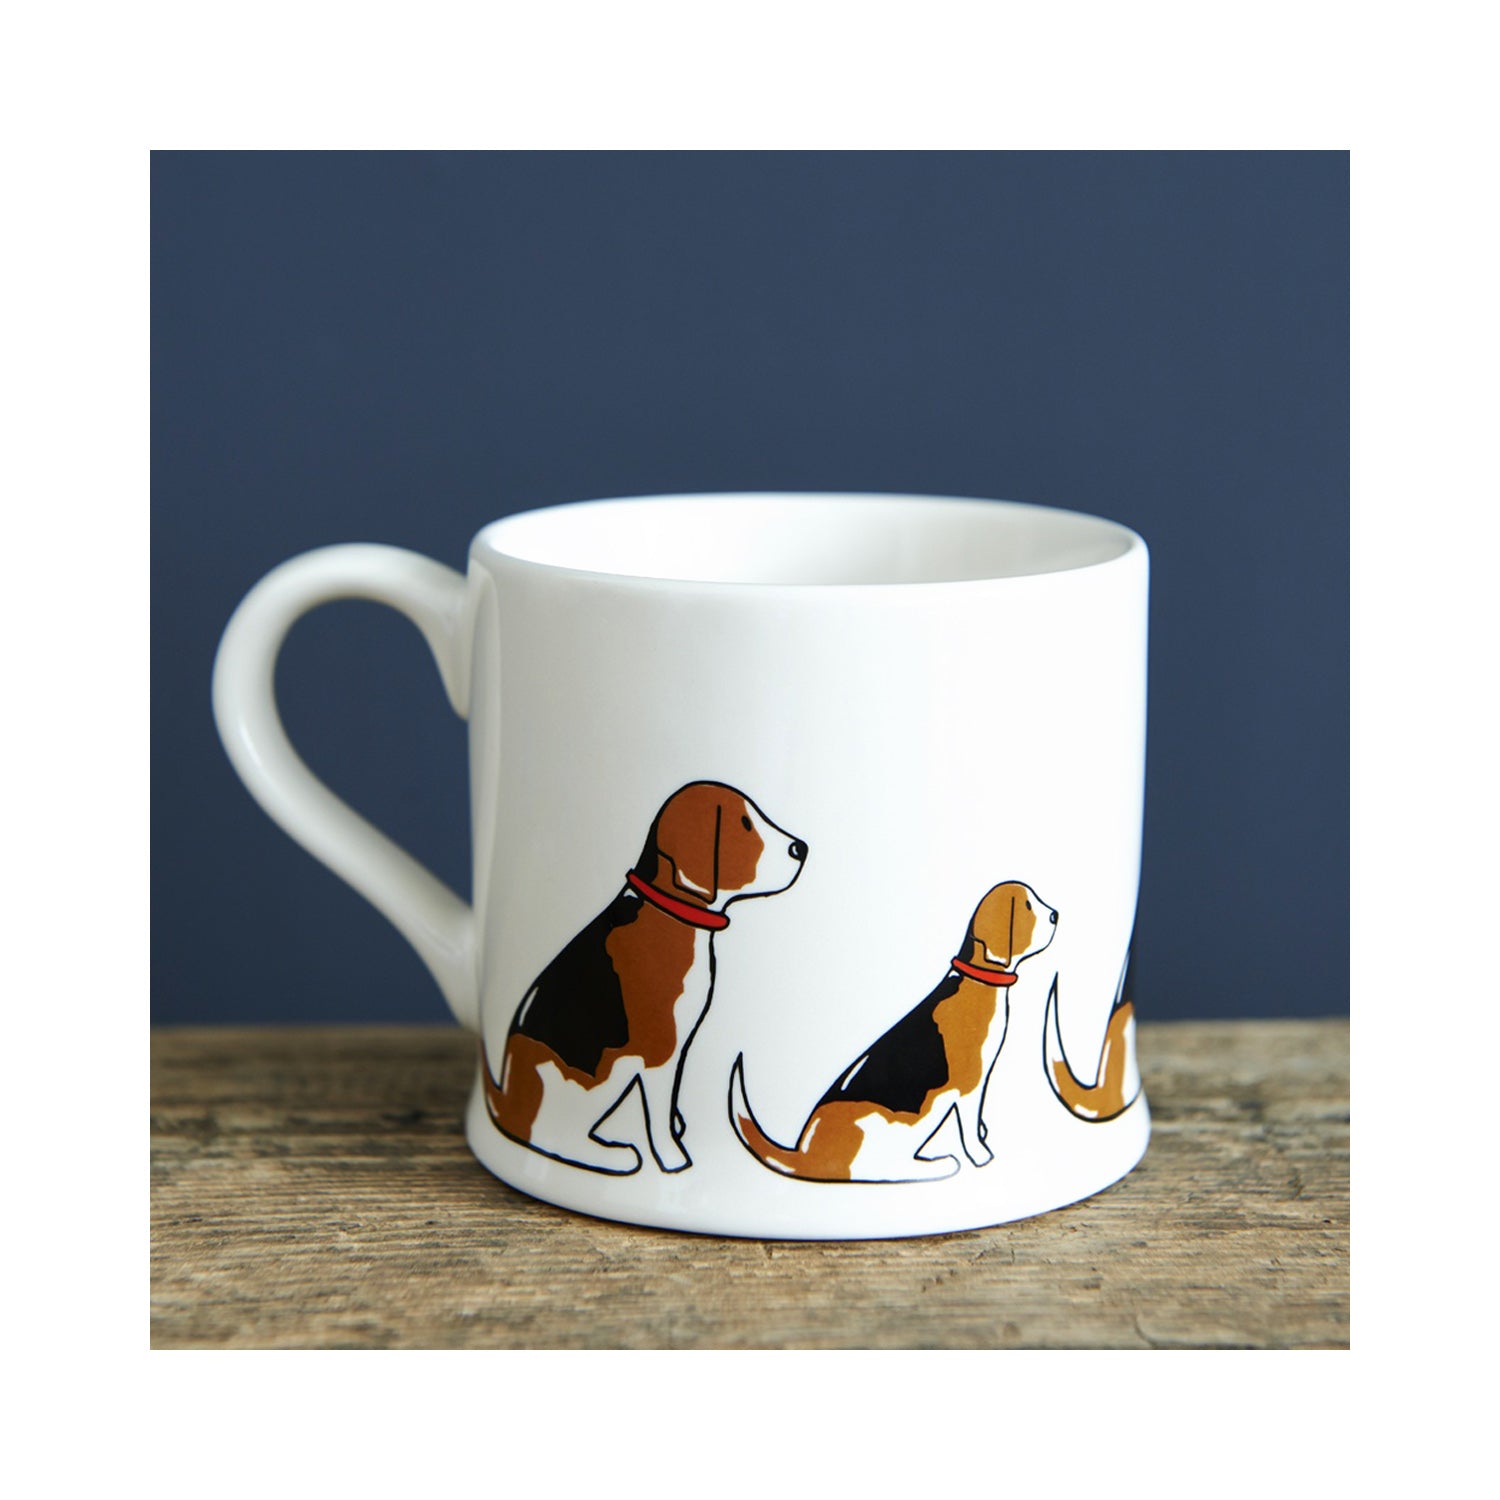 Dog Lover Gifts available at Dog Krazy Gifts - Rupert The Beagle Mug - part of the Sweet William range available from DogKrazyGifts.co.uk